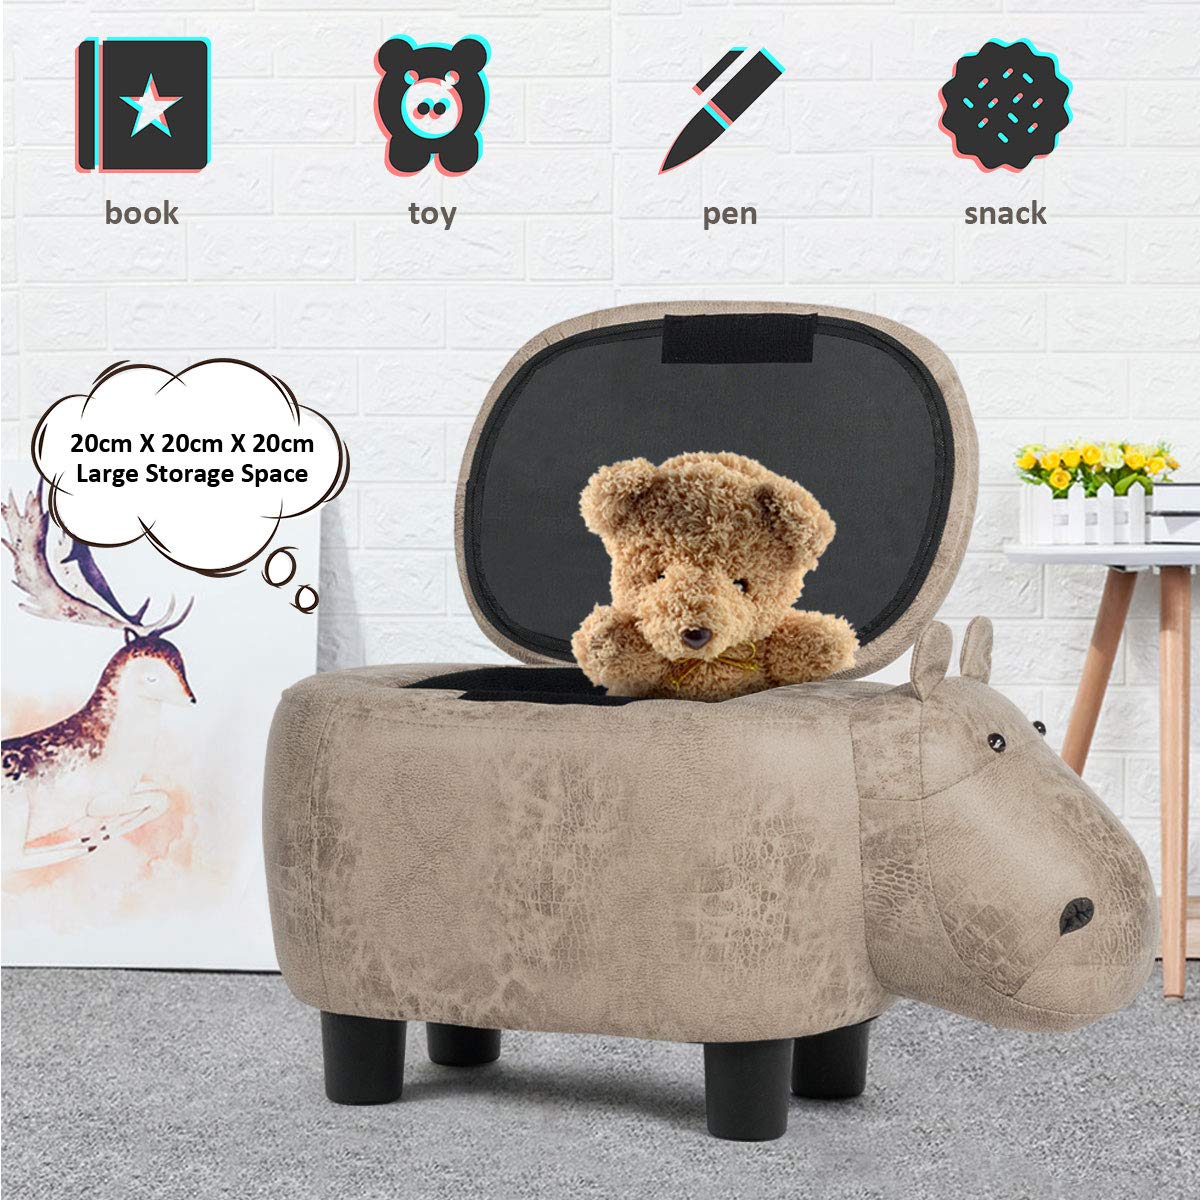 Giantex Storage Footrest Ottoman, Cute Animal Footstool, Hippo Upholstered Storage Ottoman w/Suede Fabric